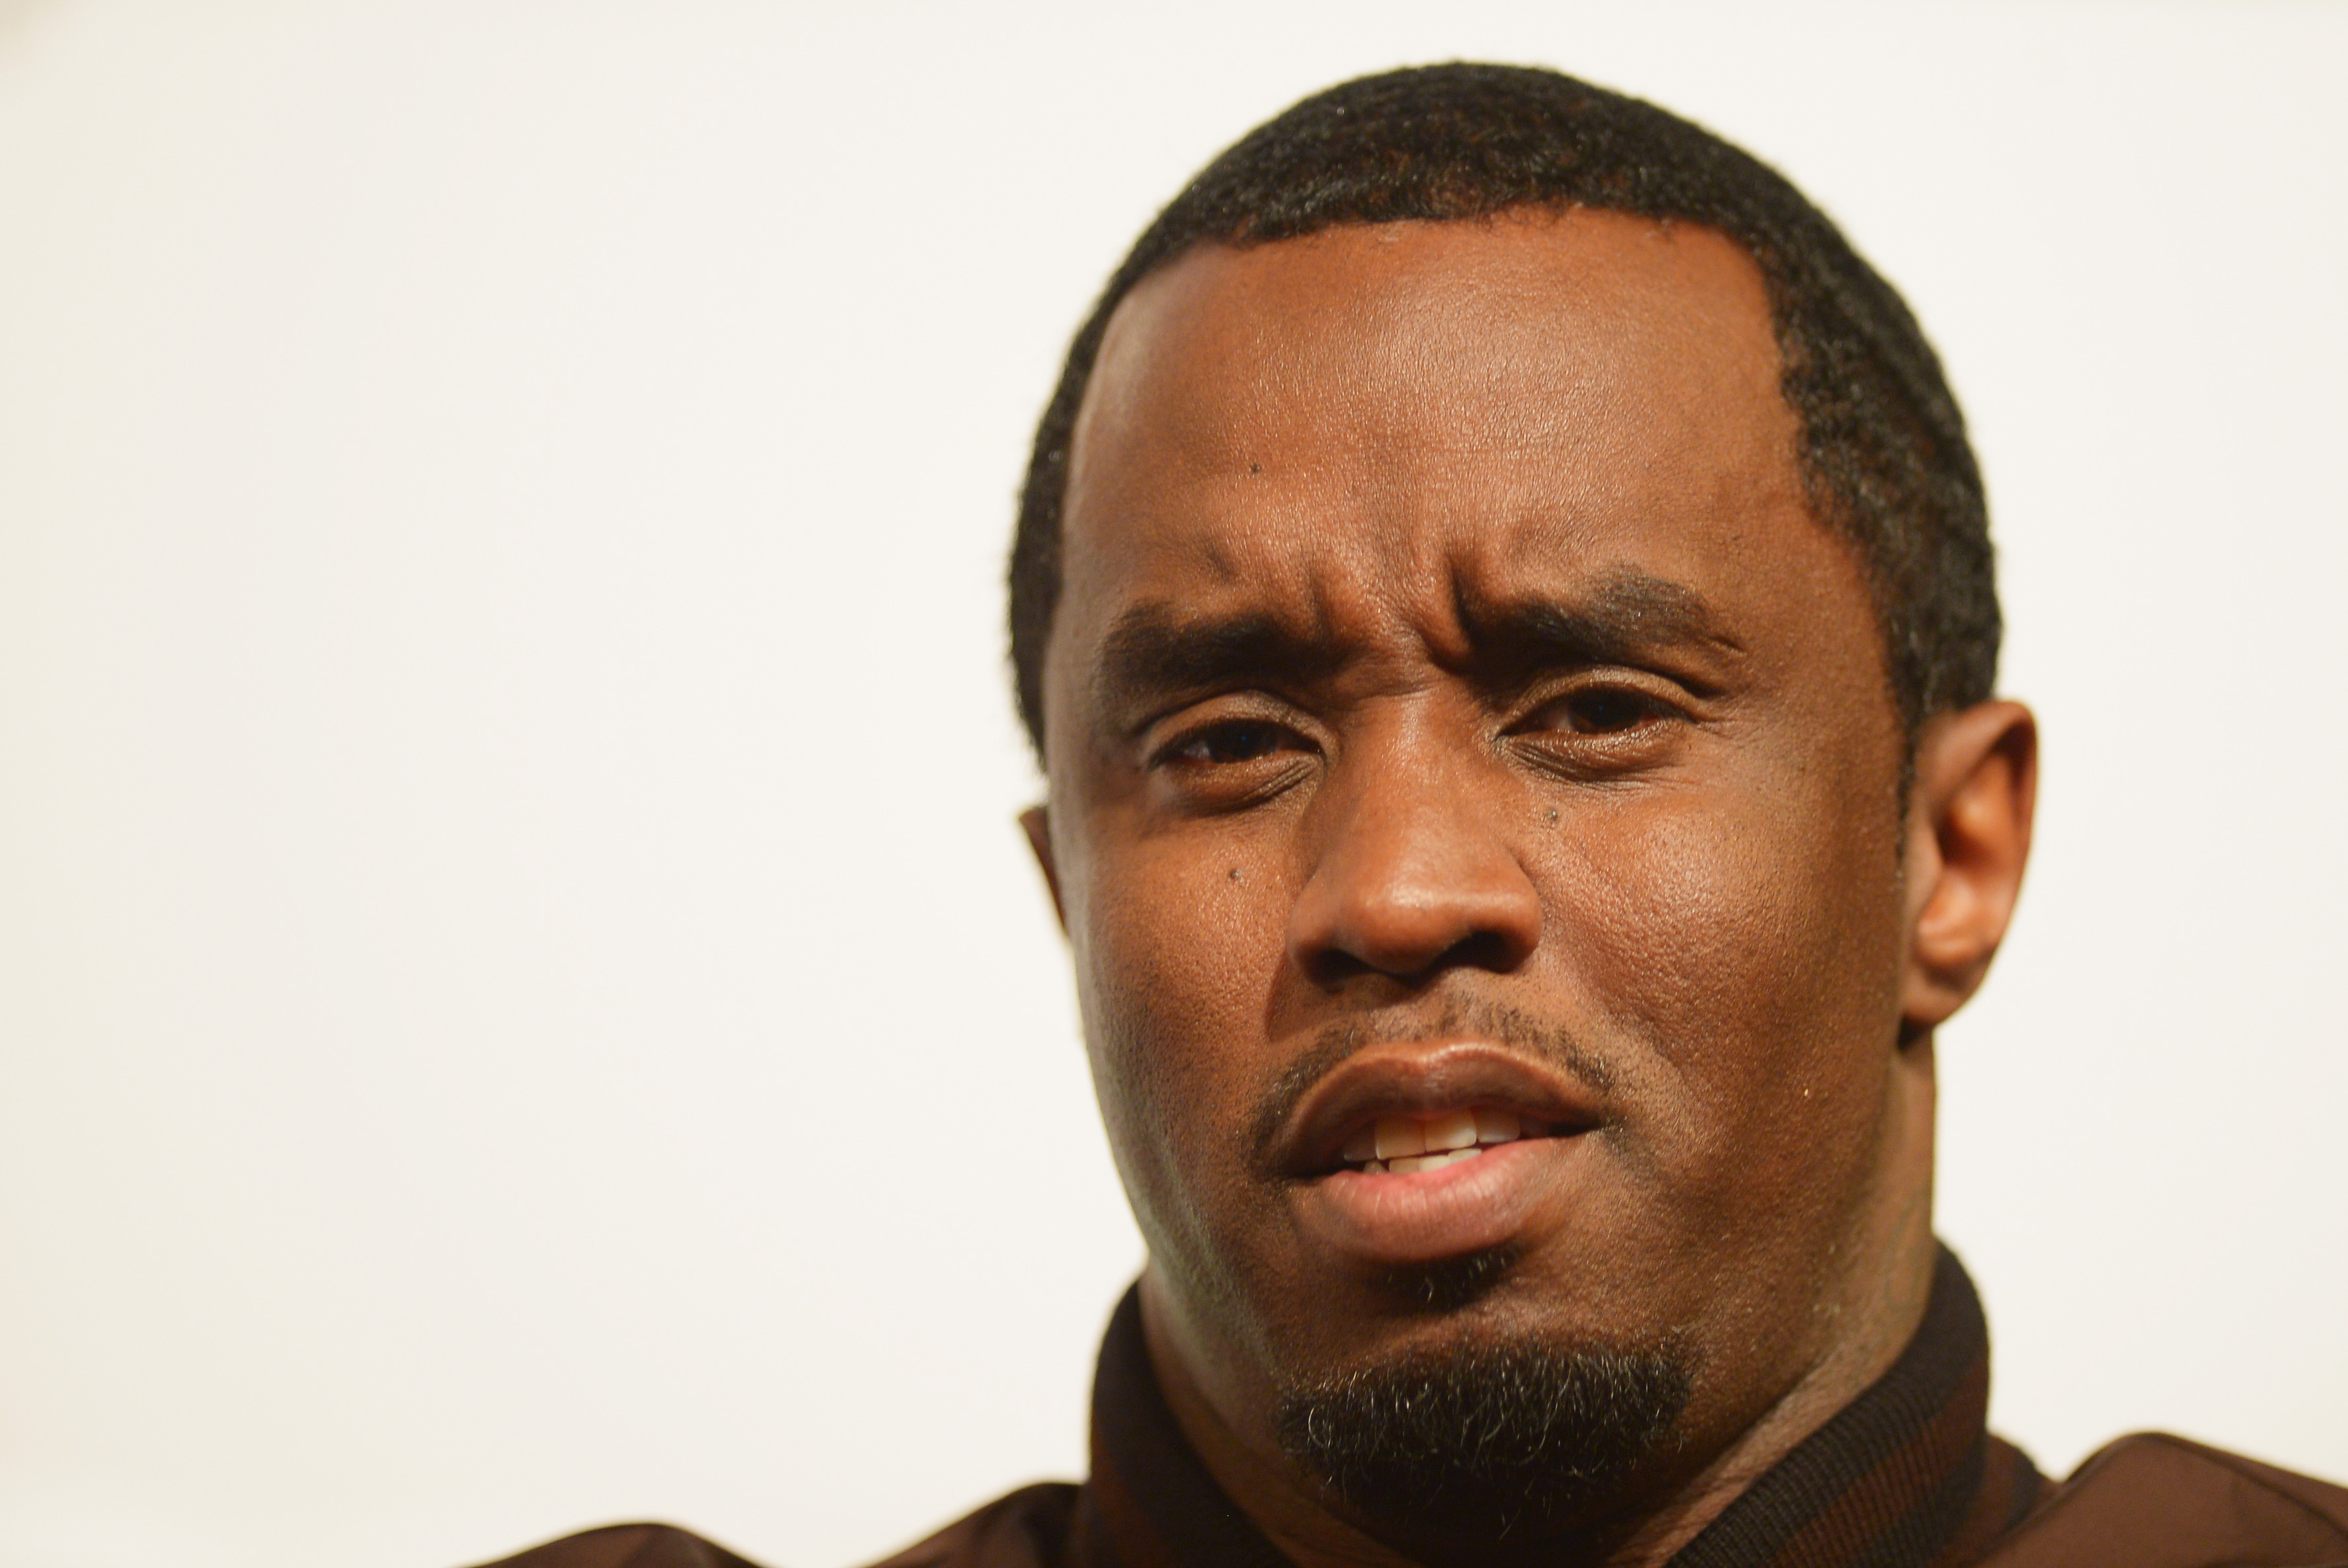 Diddy Is Now Puff Daddy, But Will Forever Be Known As “What's He Calling  Himself Now?” — VIDEO